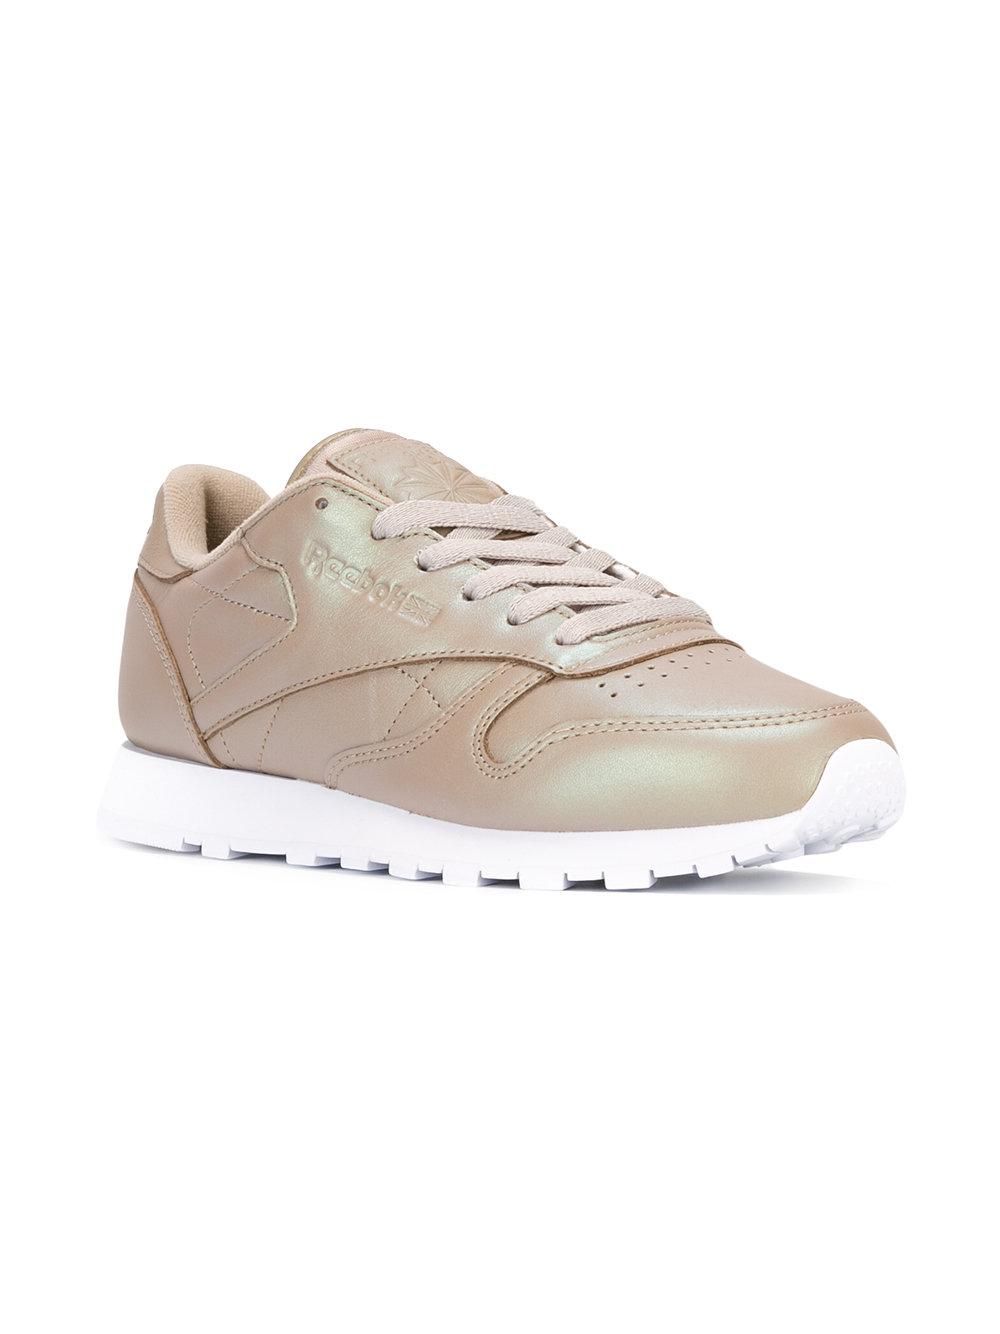 Reebok Leather Classic Hologram Sneakers in Natural | Lyst